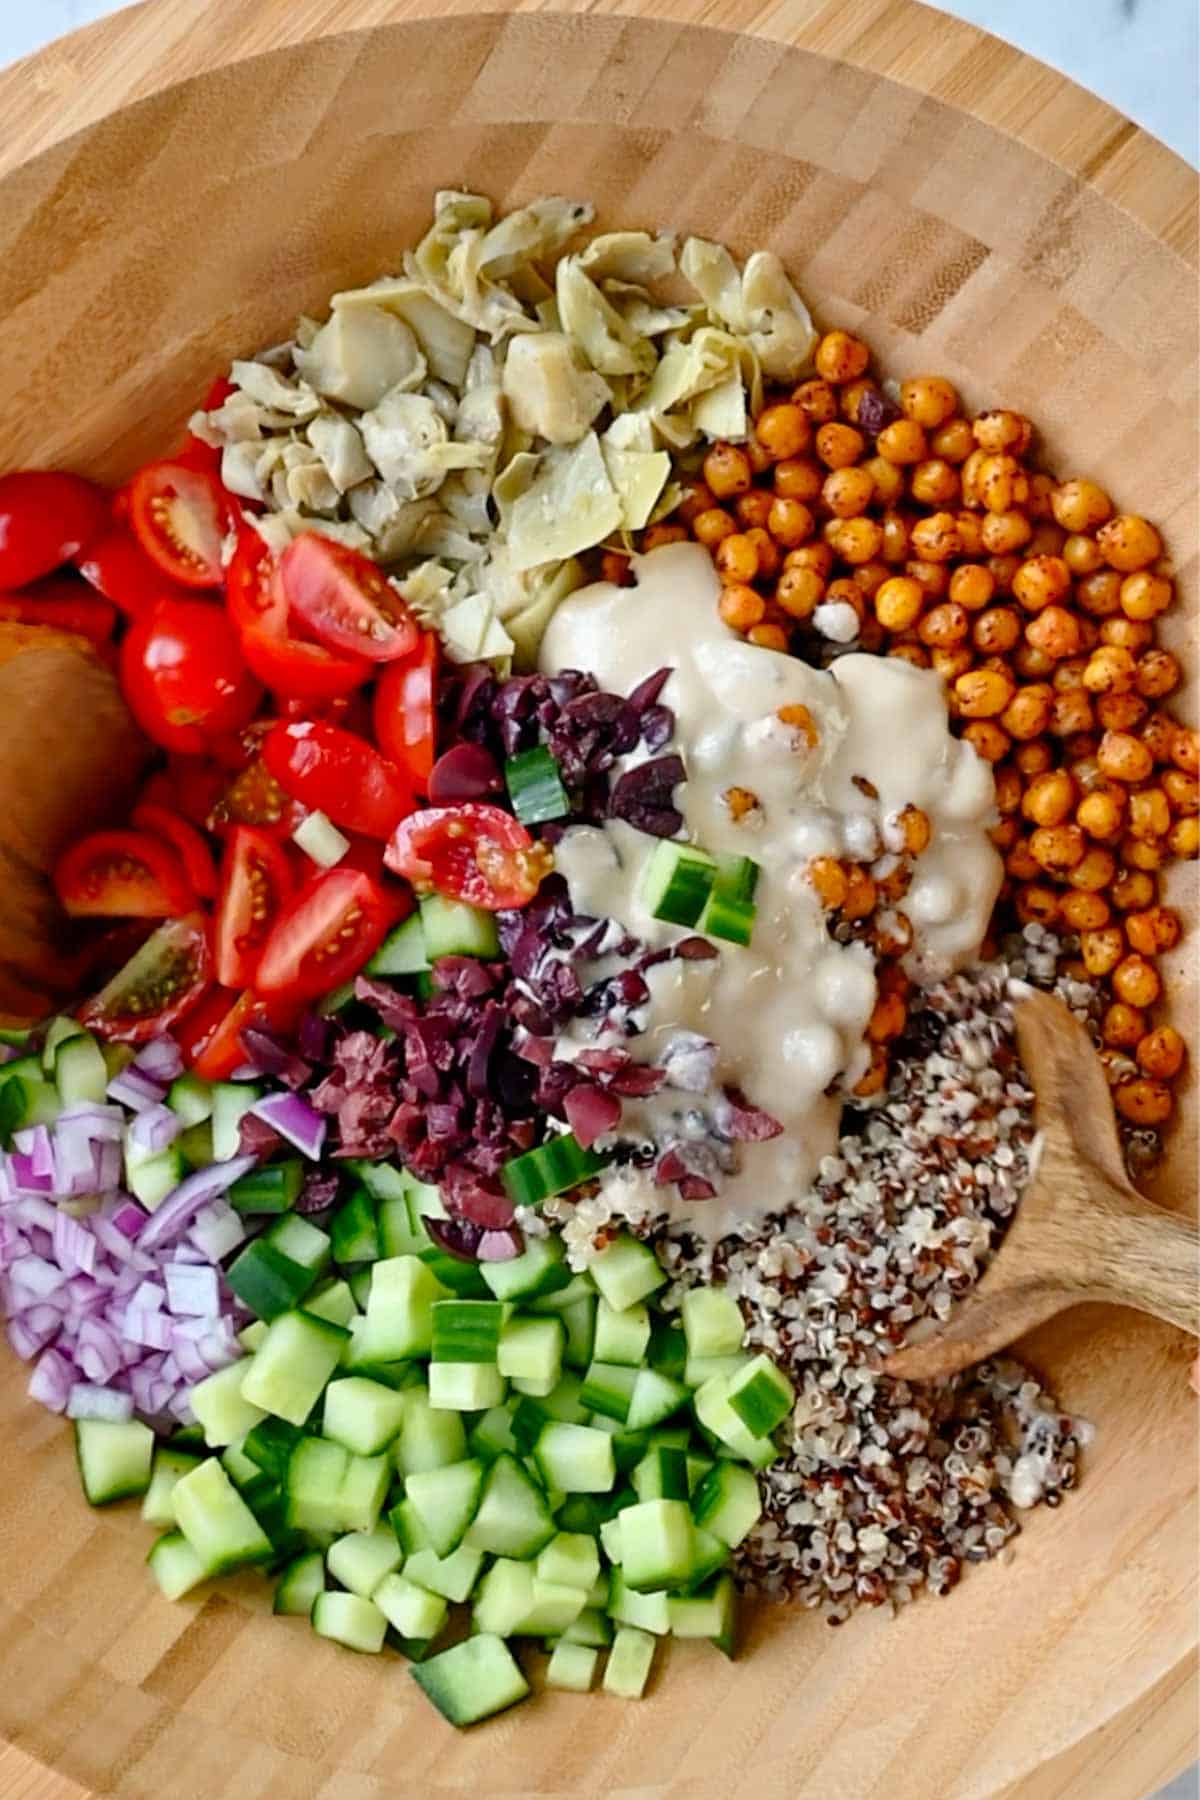 Quinoa, arugula, roasted chickpeas, chopped cucumber, red onion, grape tomatoes, kalamata olives, artichoke hearts, and creamy hummus dressing in a wooden bowl.